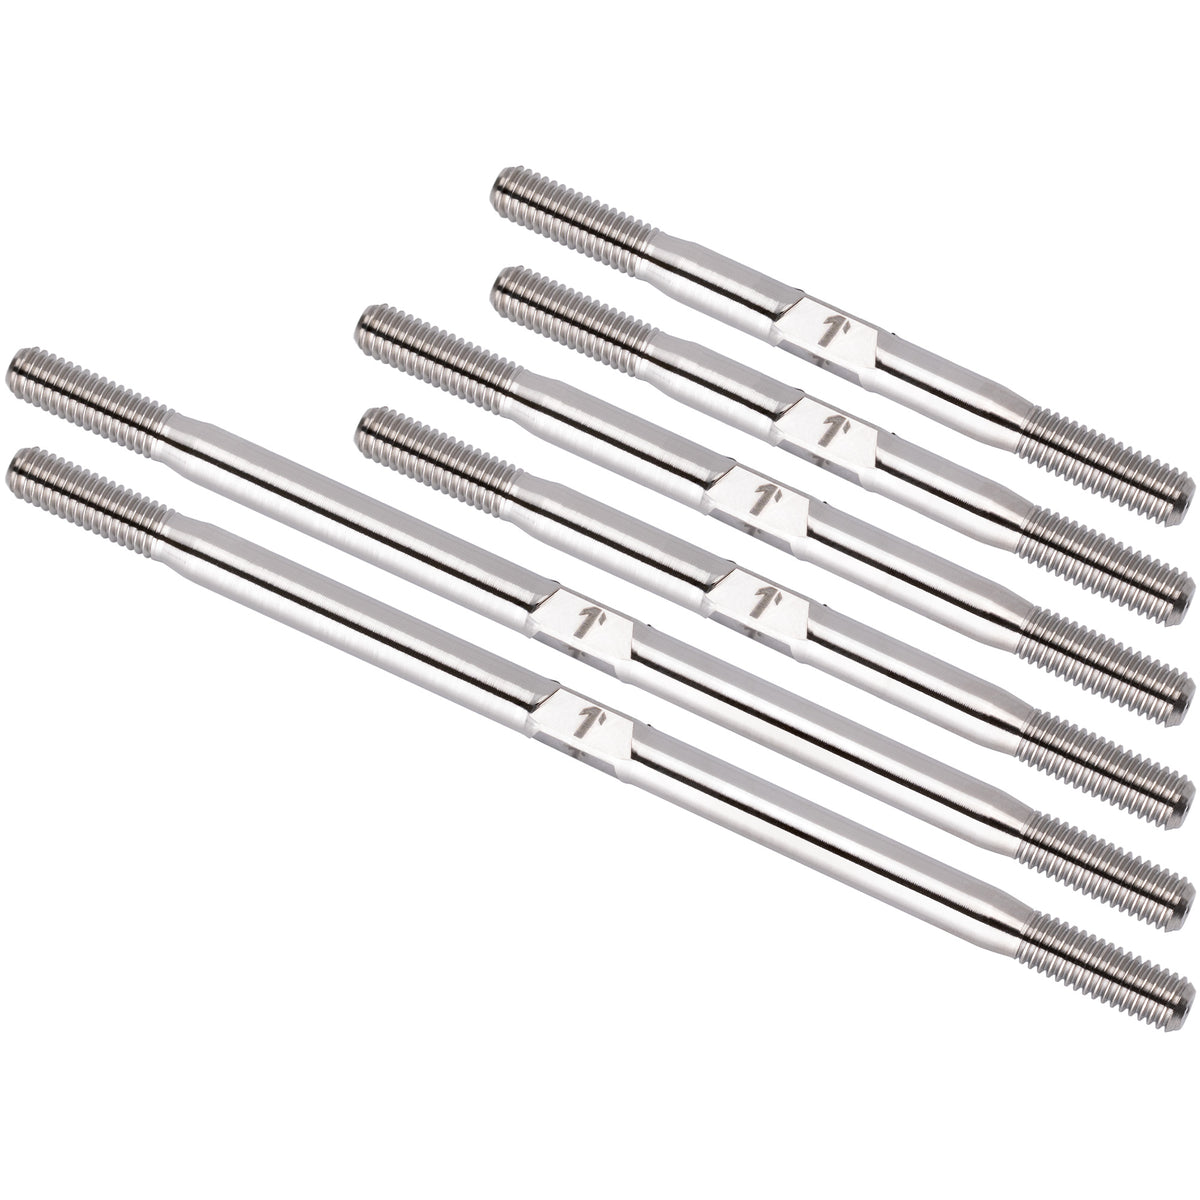 1up Racing Pro Duty Titanium Turnbuckles - TLR 22T 4.0